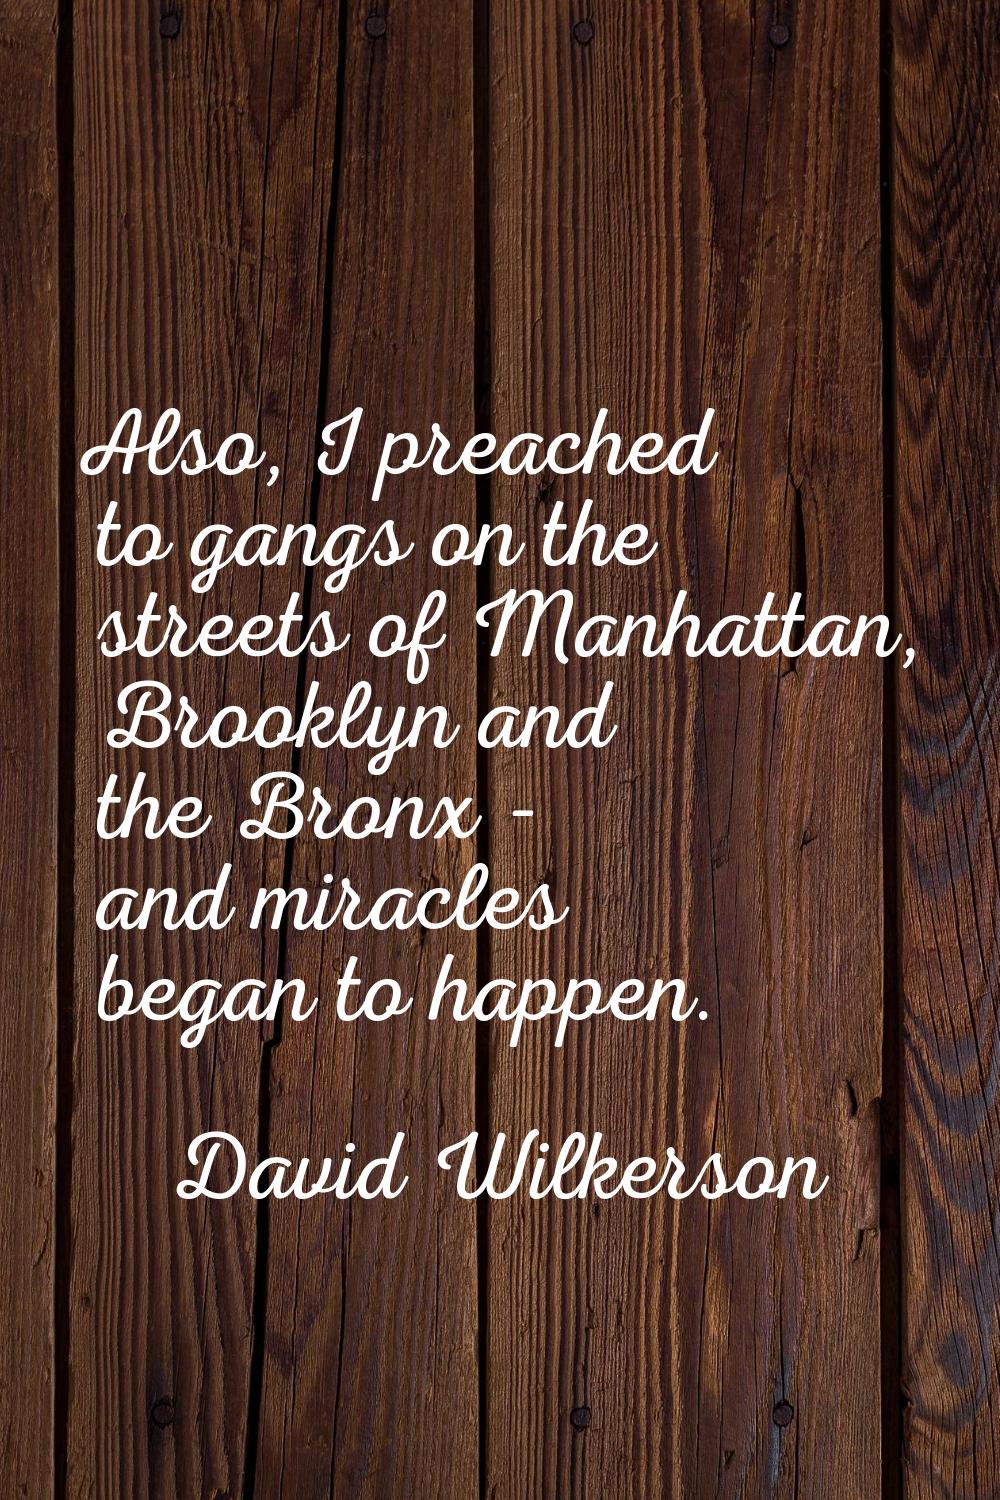 Also, I preached to gangs on the streets of Manhattan, Brooklyn and the Bronx - and miracles began 